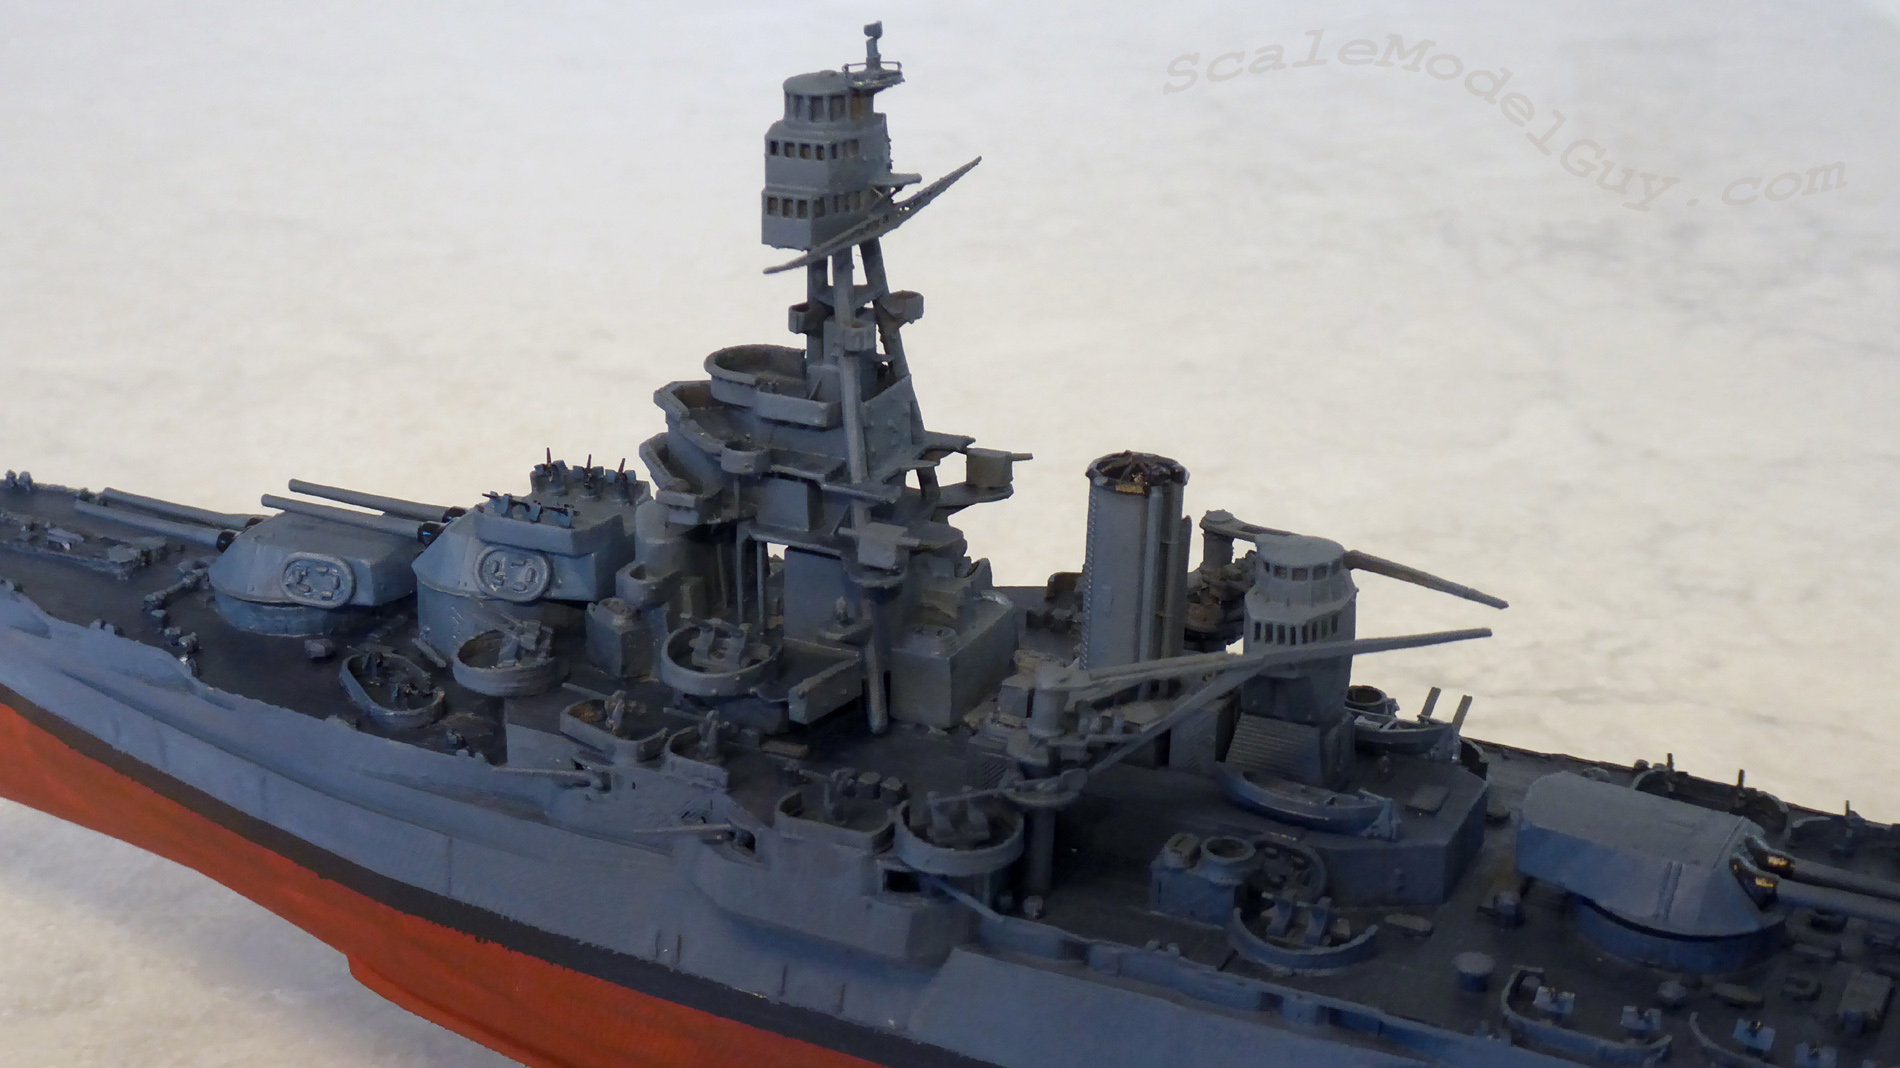 Battleship USS Texas in 1/450 scale LD-002r & Ender 3 Pro 3D printed 